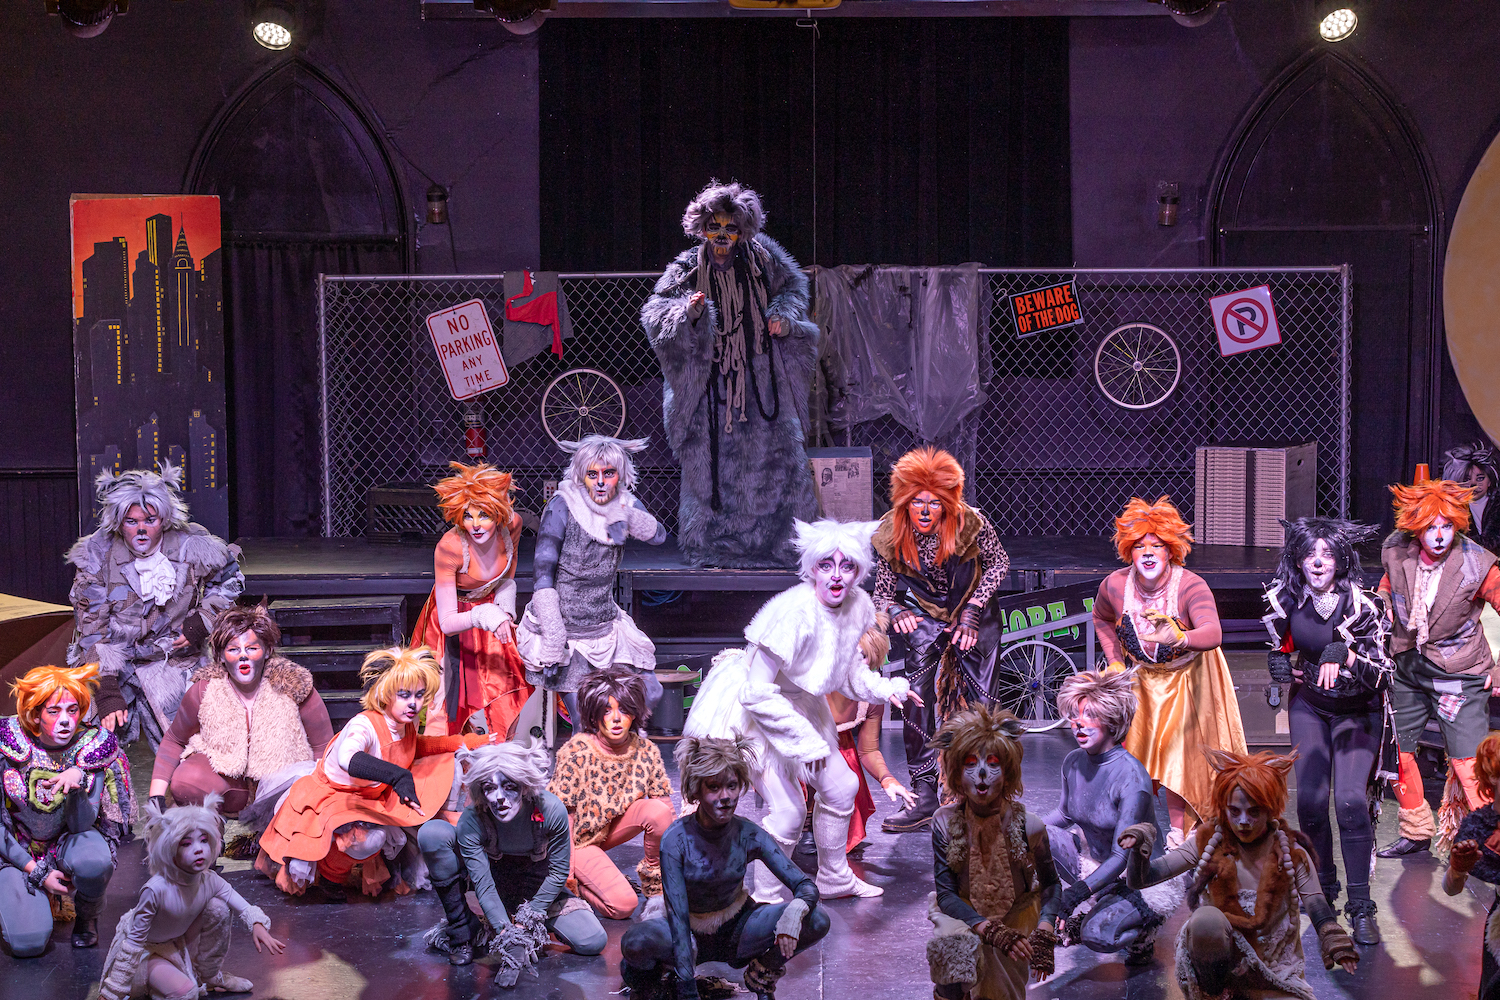 Cats the musical' coming to Carson City  Serving Carson City for over 150  years